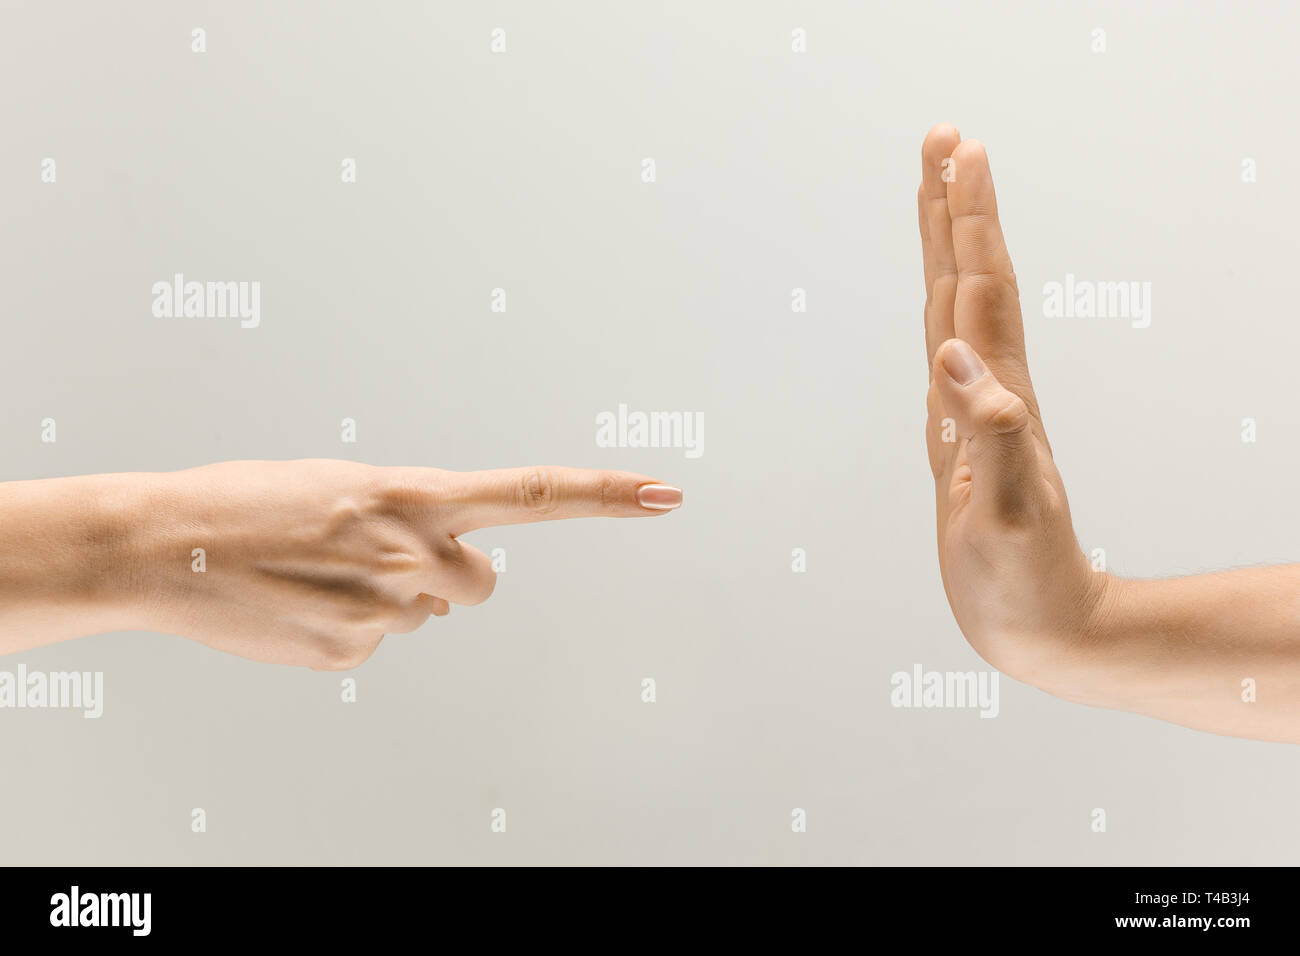 Woman rights. Two human hands showing sign of stopping isolated on grey studio background. Concept of human relations, disagreement, renouncement and resistance. Stock Photo